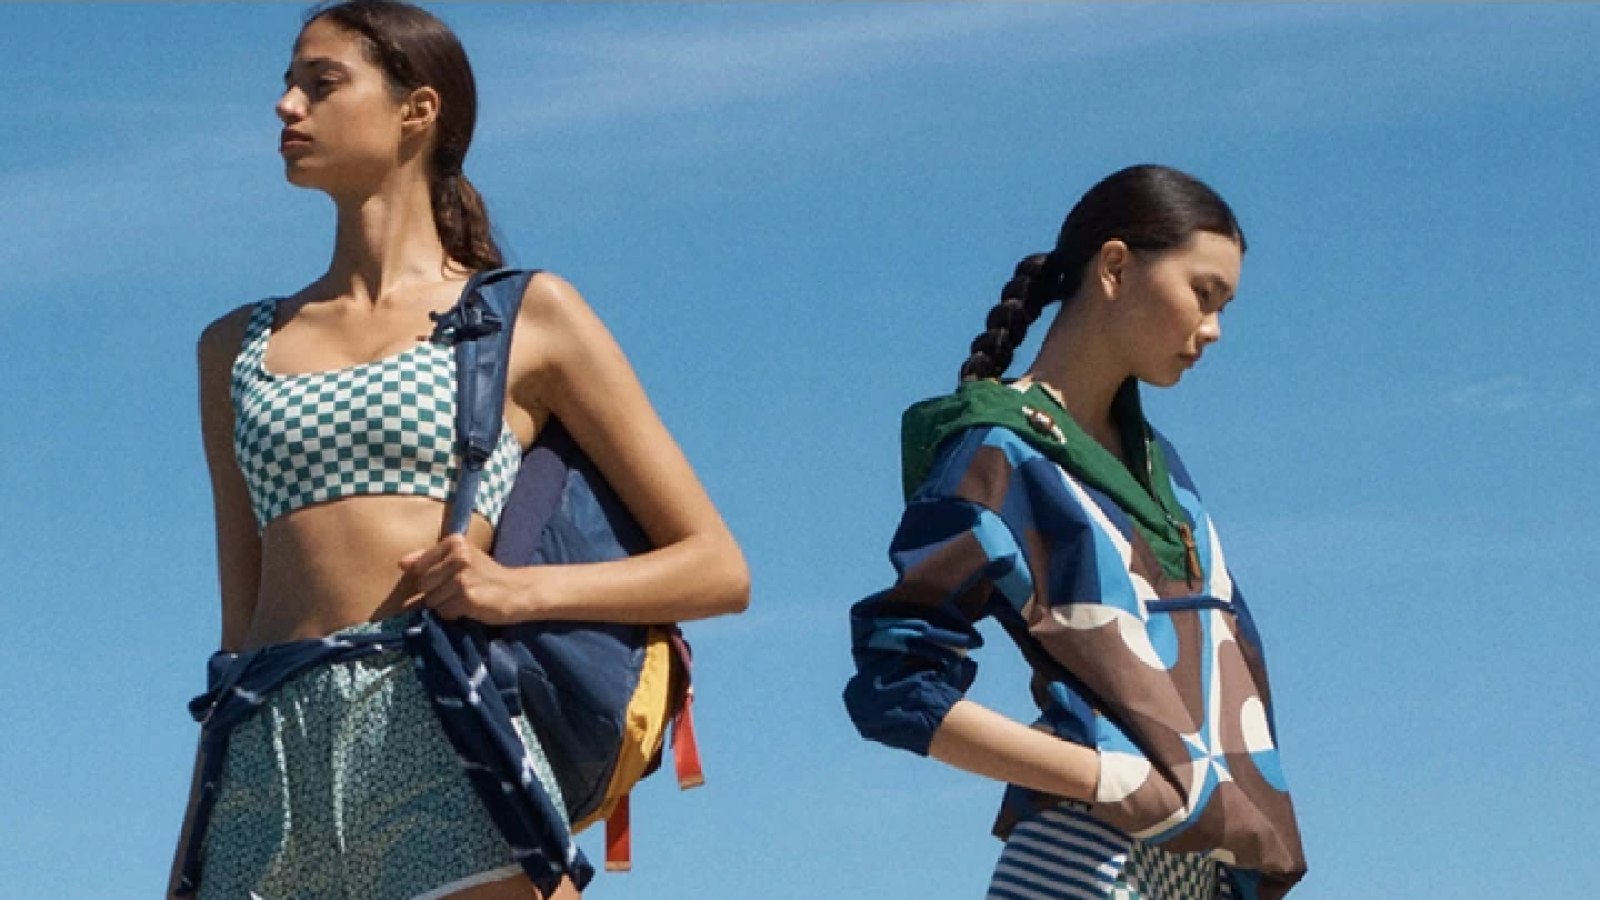 Tory Burch - The new Tory Sport tie-dye collection is here and going fast  Shop now